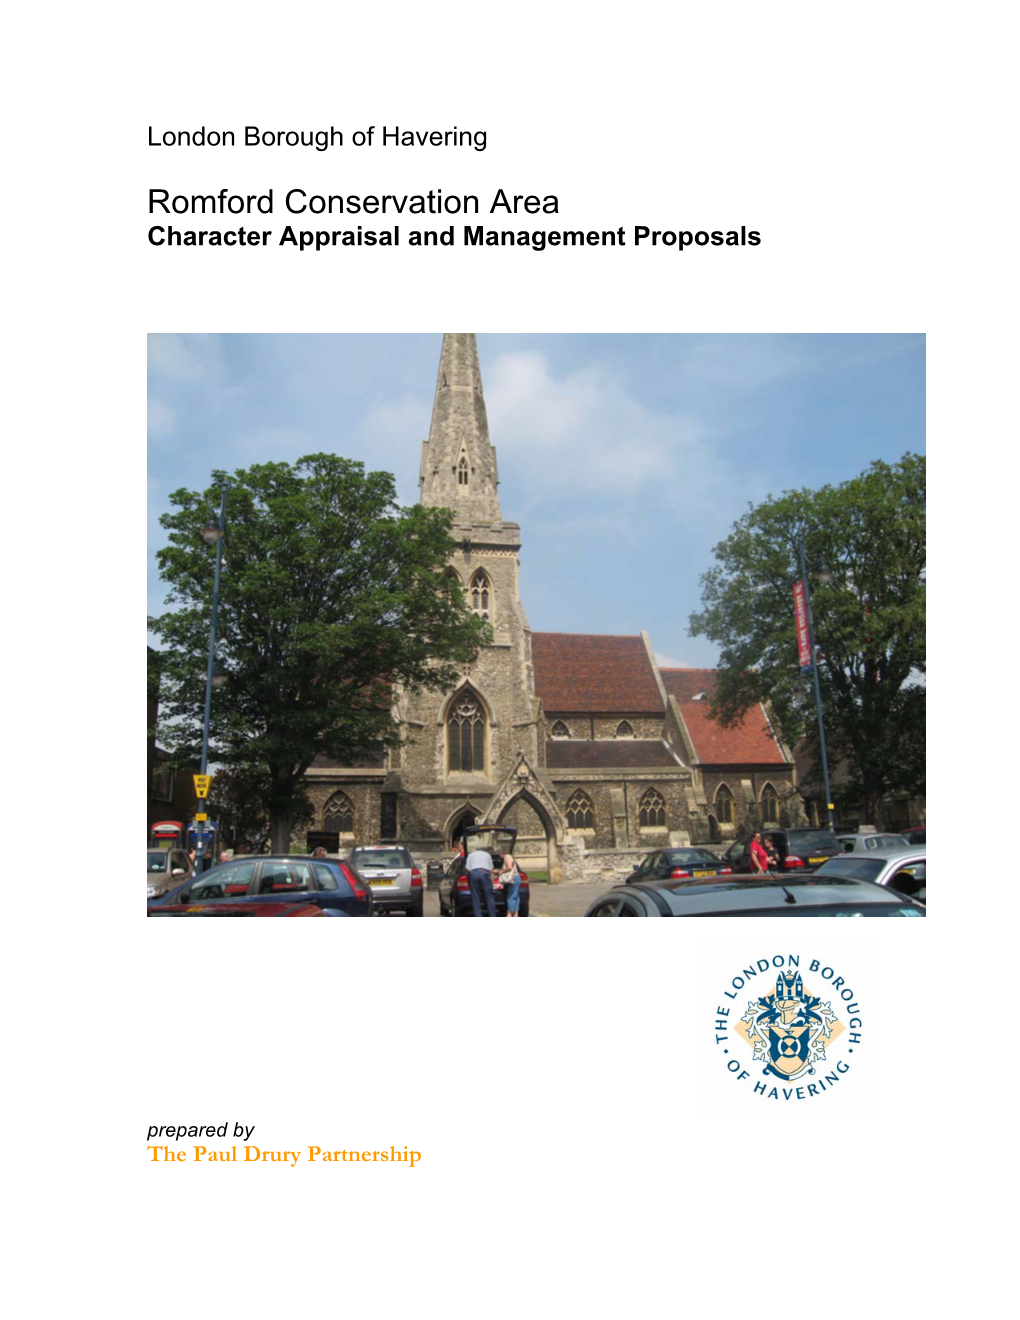 Romford Conservation Area Character Appraisal and Management Proposals